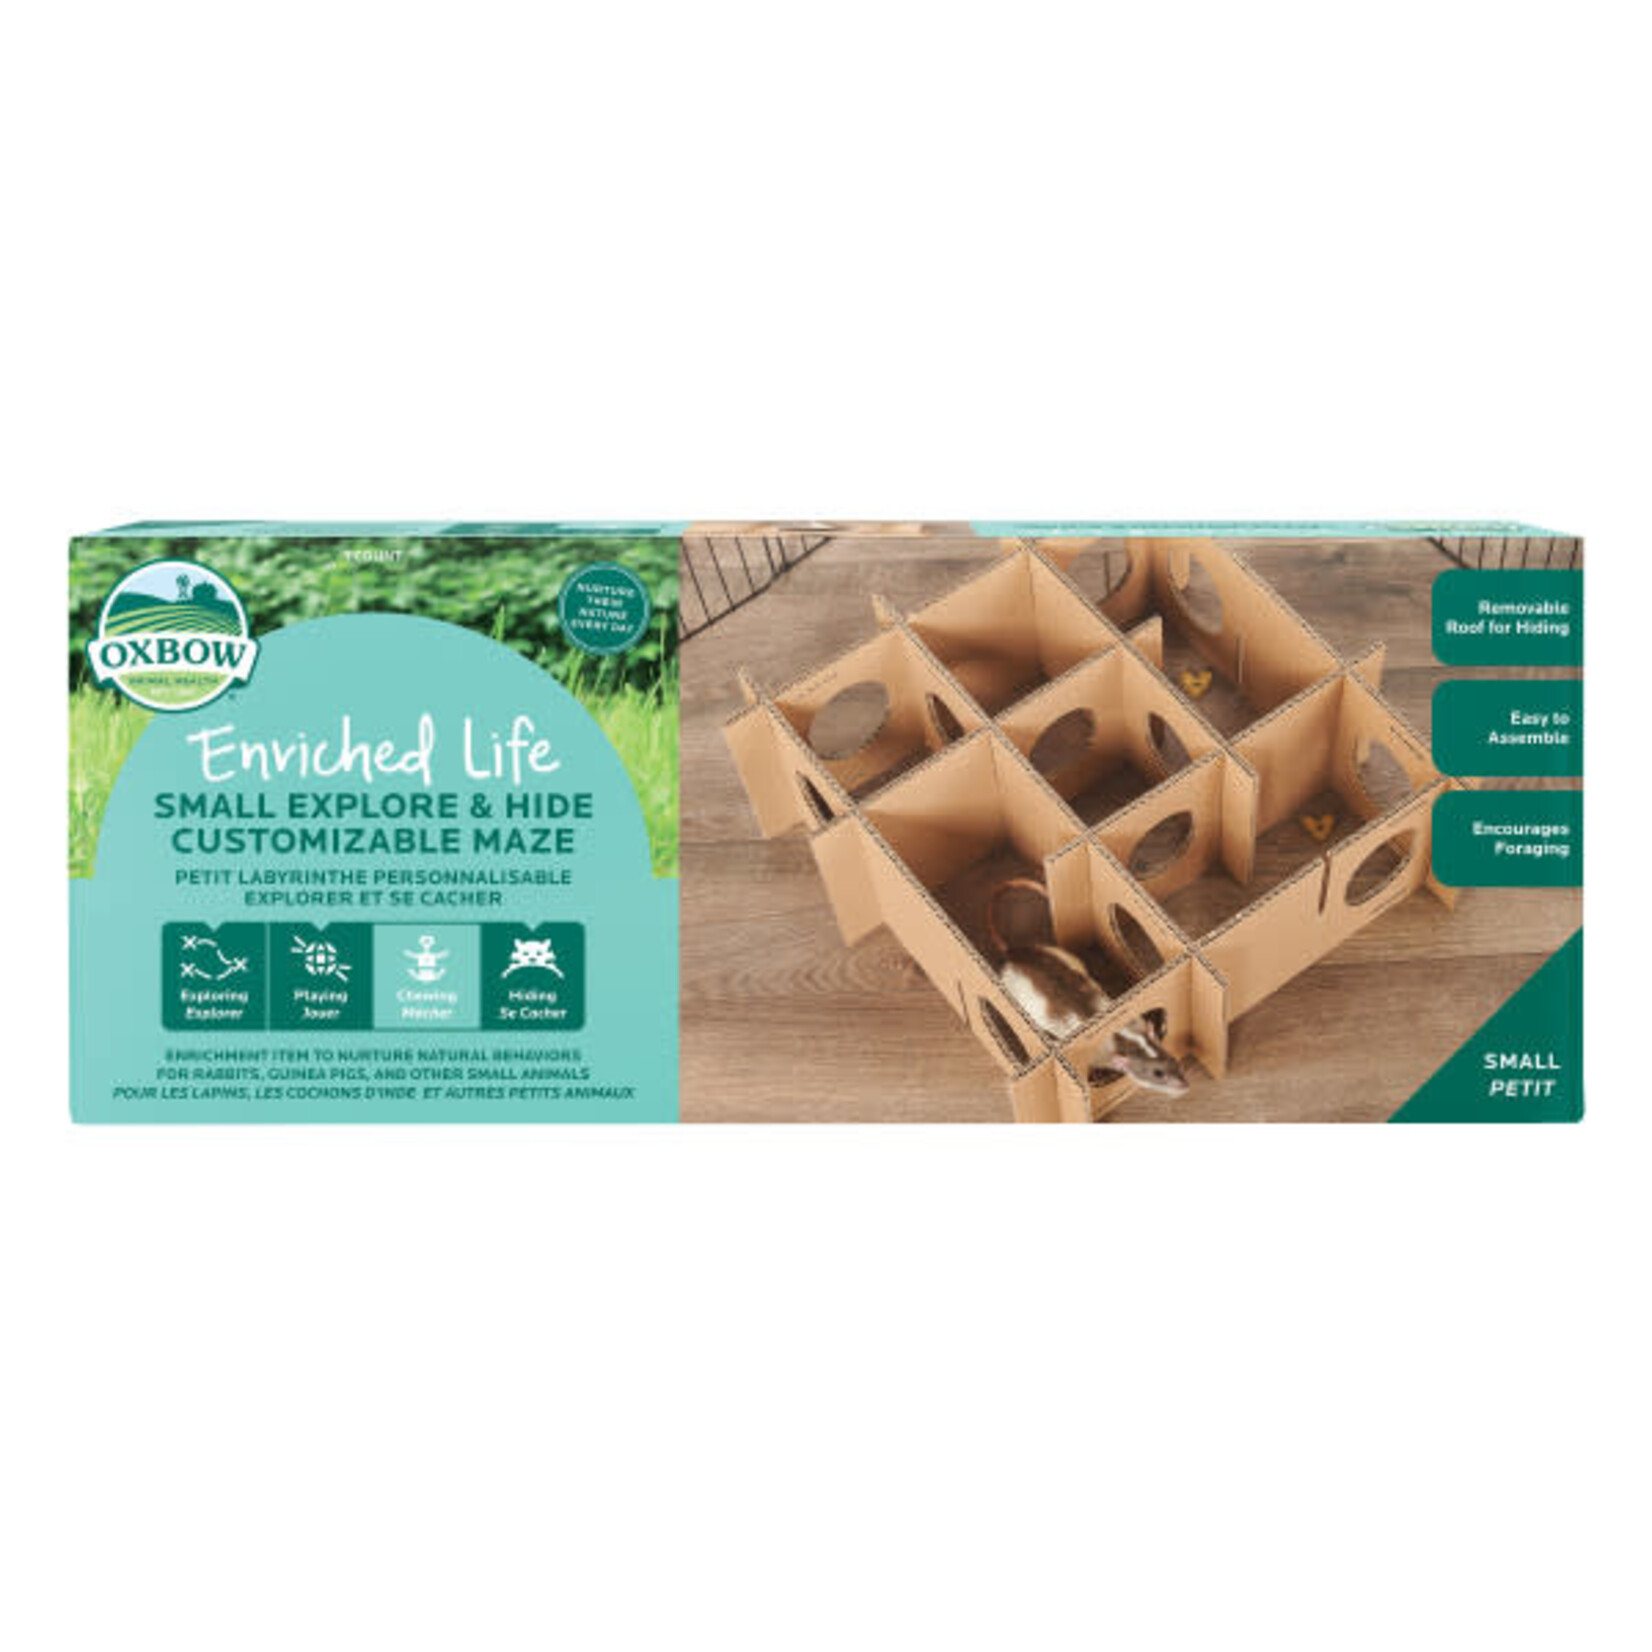 OXBOW ANIMAL HEALTH OXBOW Enriched Life Small Explore & Hide Customizable Maze